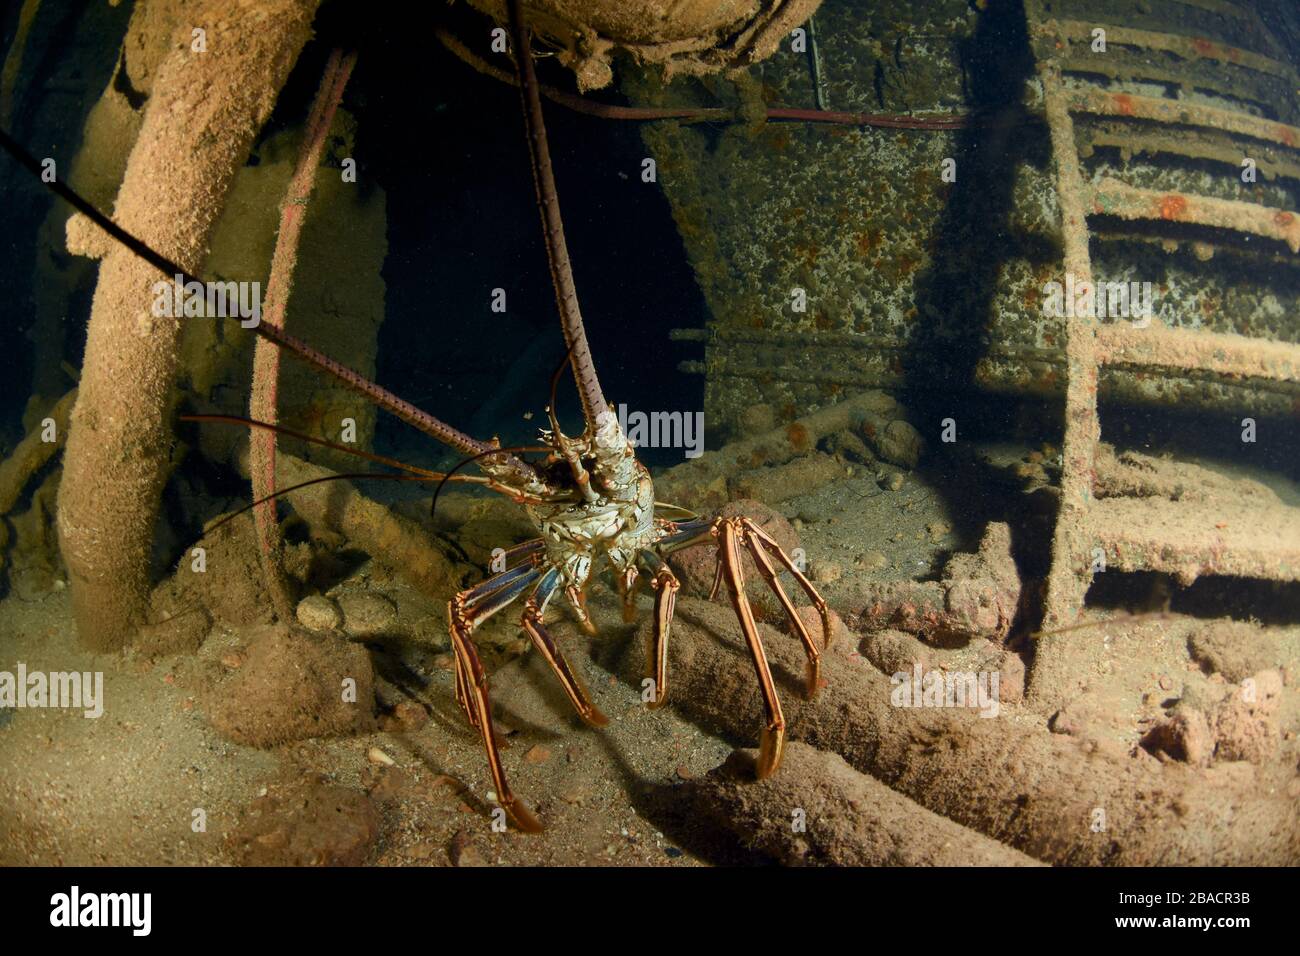 Caribbean spiny lobster walking about inside the ship wreck of Carib Cargo in St. Maarten Stock Photo